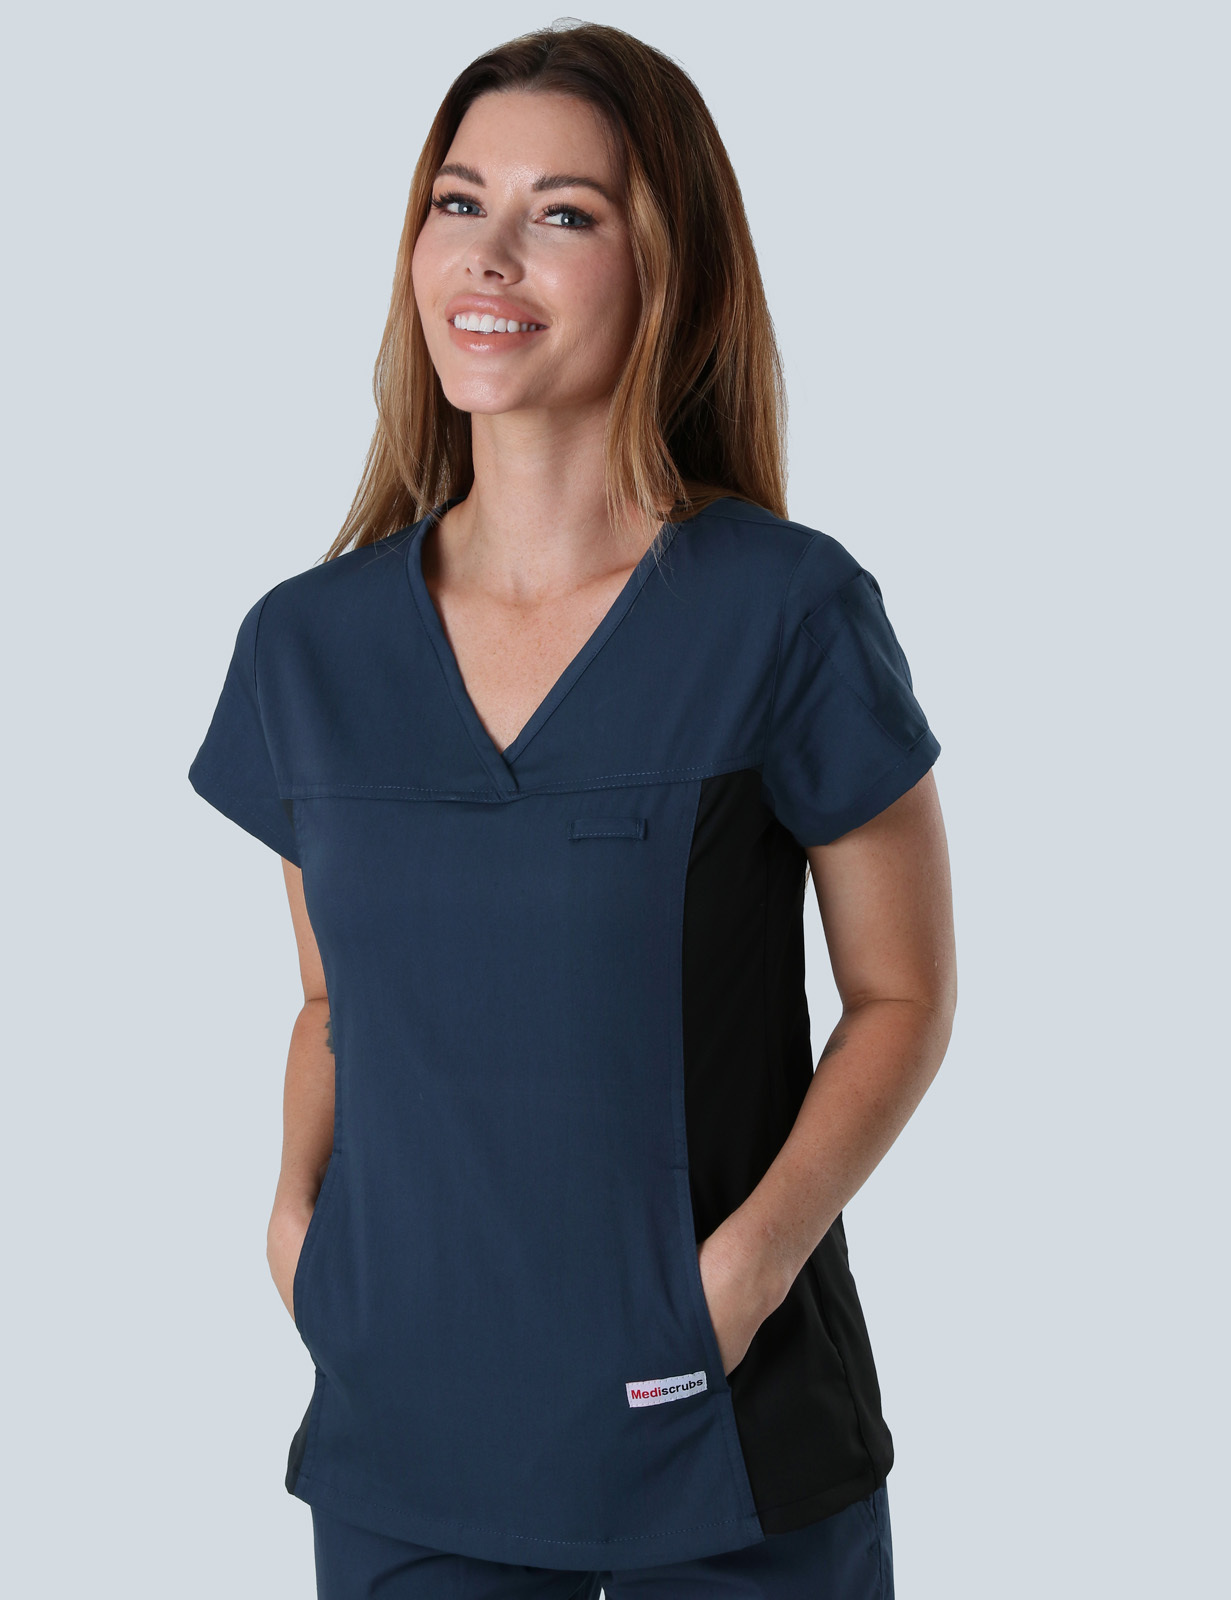 Gladstone Hospital - ED CN (Women's Fit Spandex Scrub Top and Cargo Pants in Navy incl Logos)